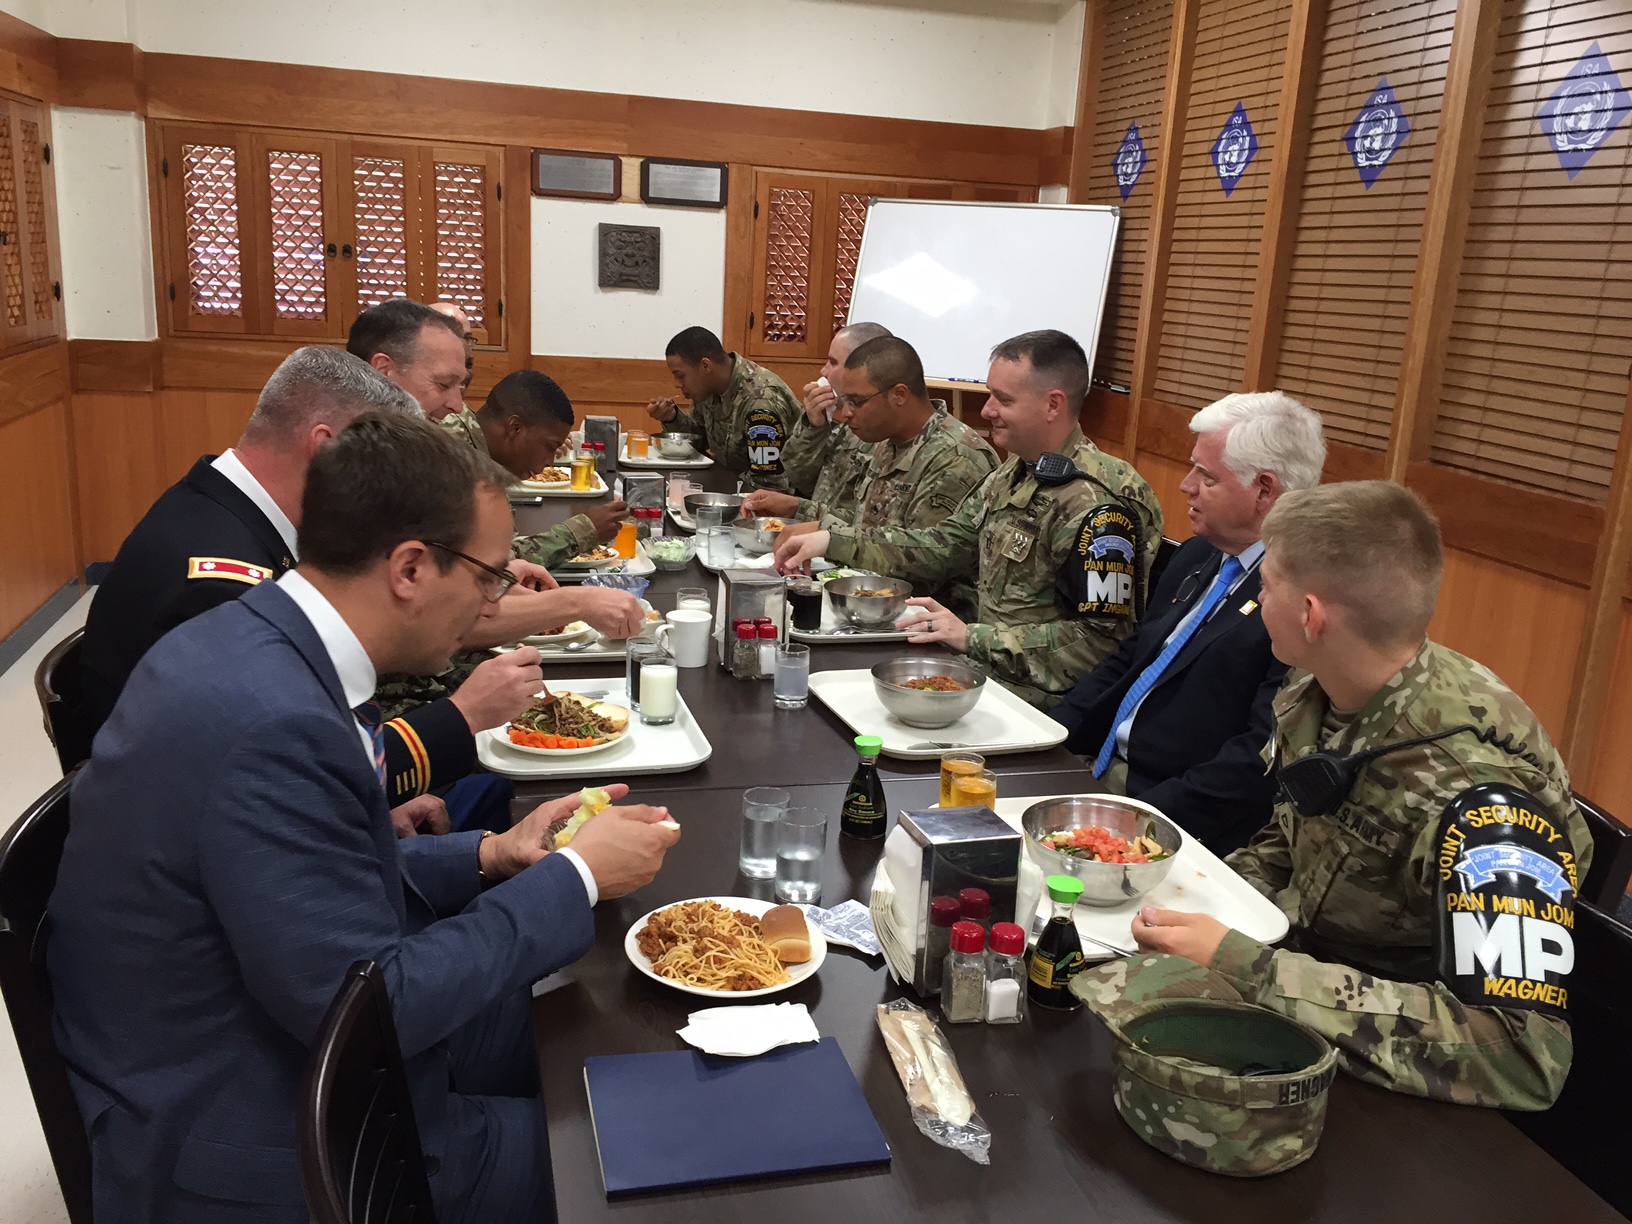 Rep. Larson dines with US Forces stationed in Korea